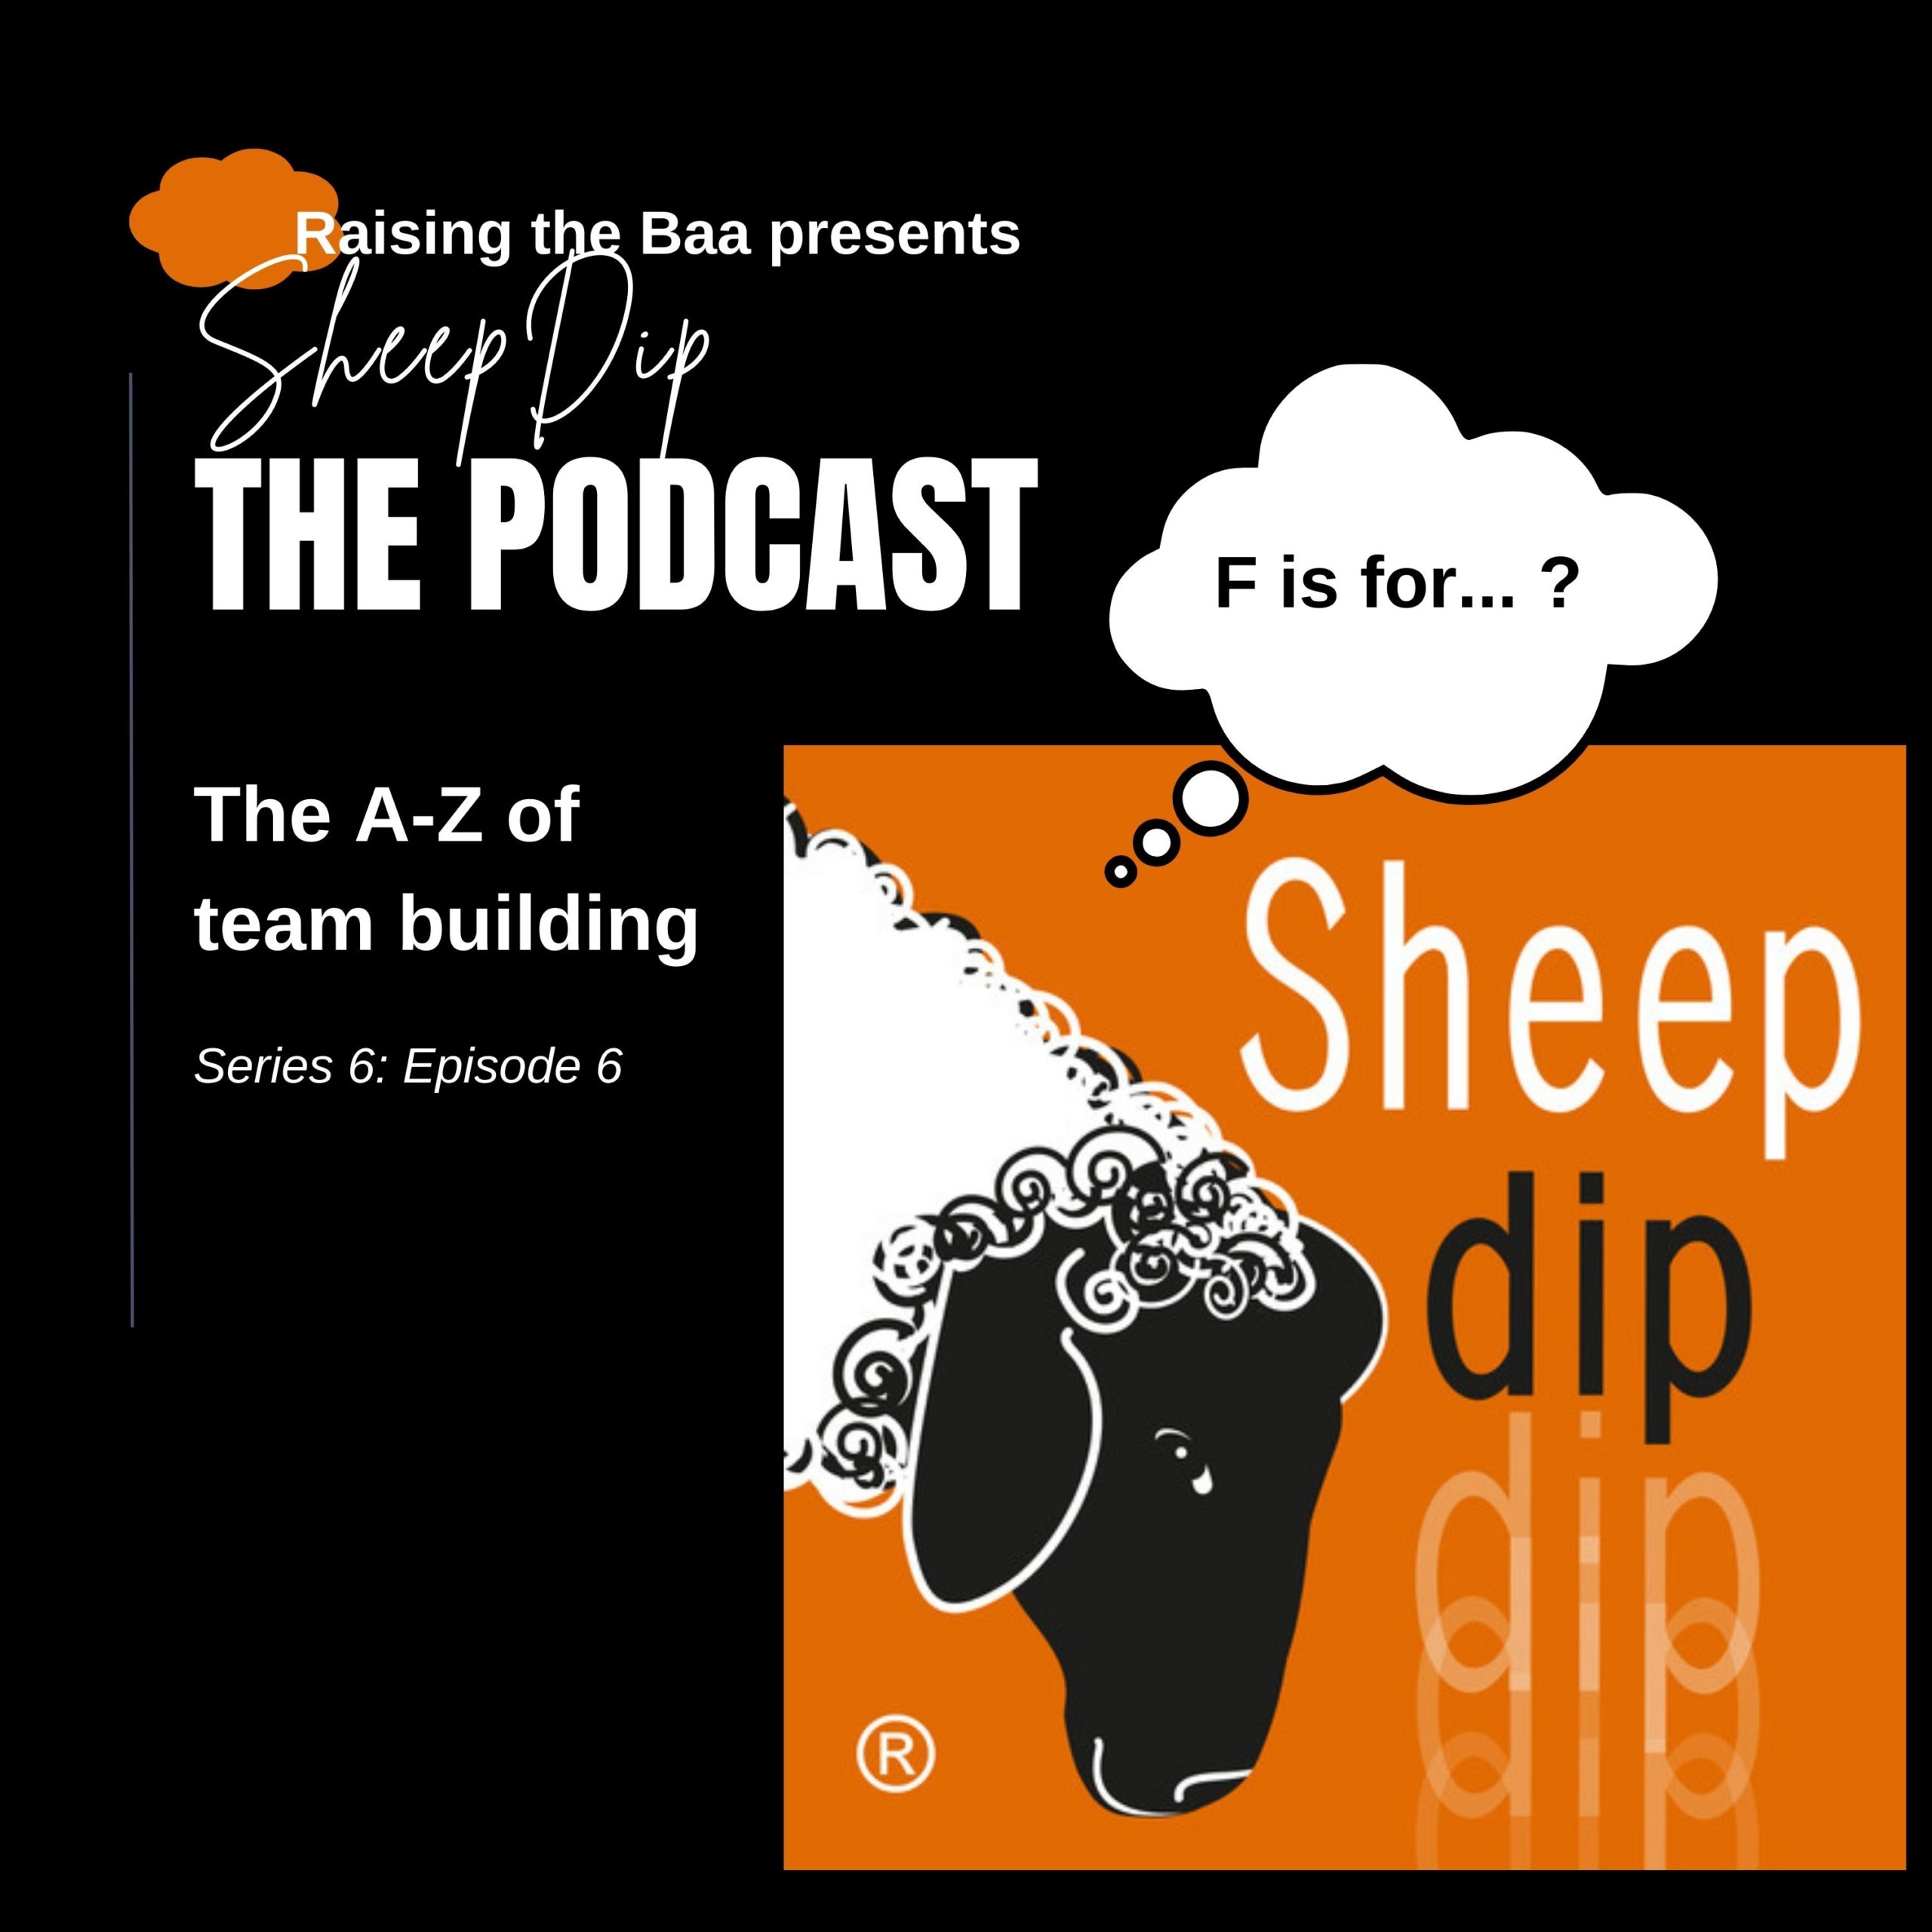 In team building,  F is for ... - Podcast cover 2